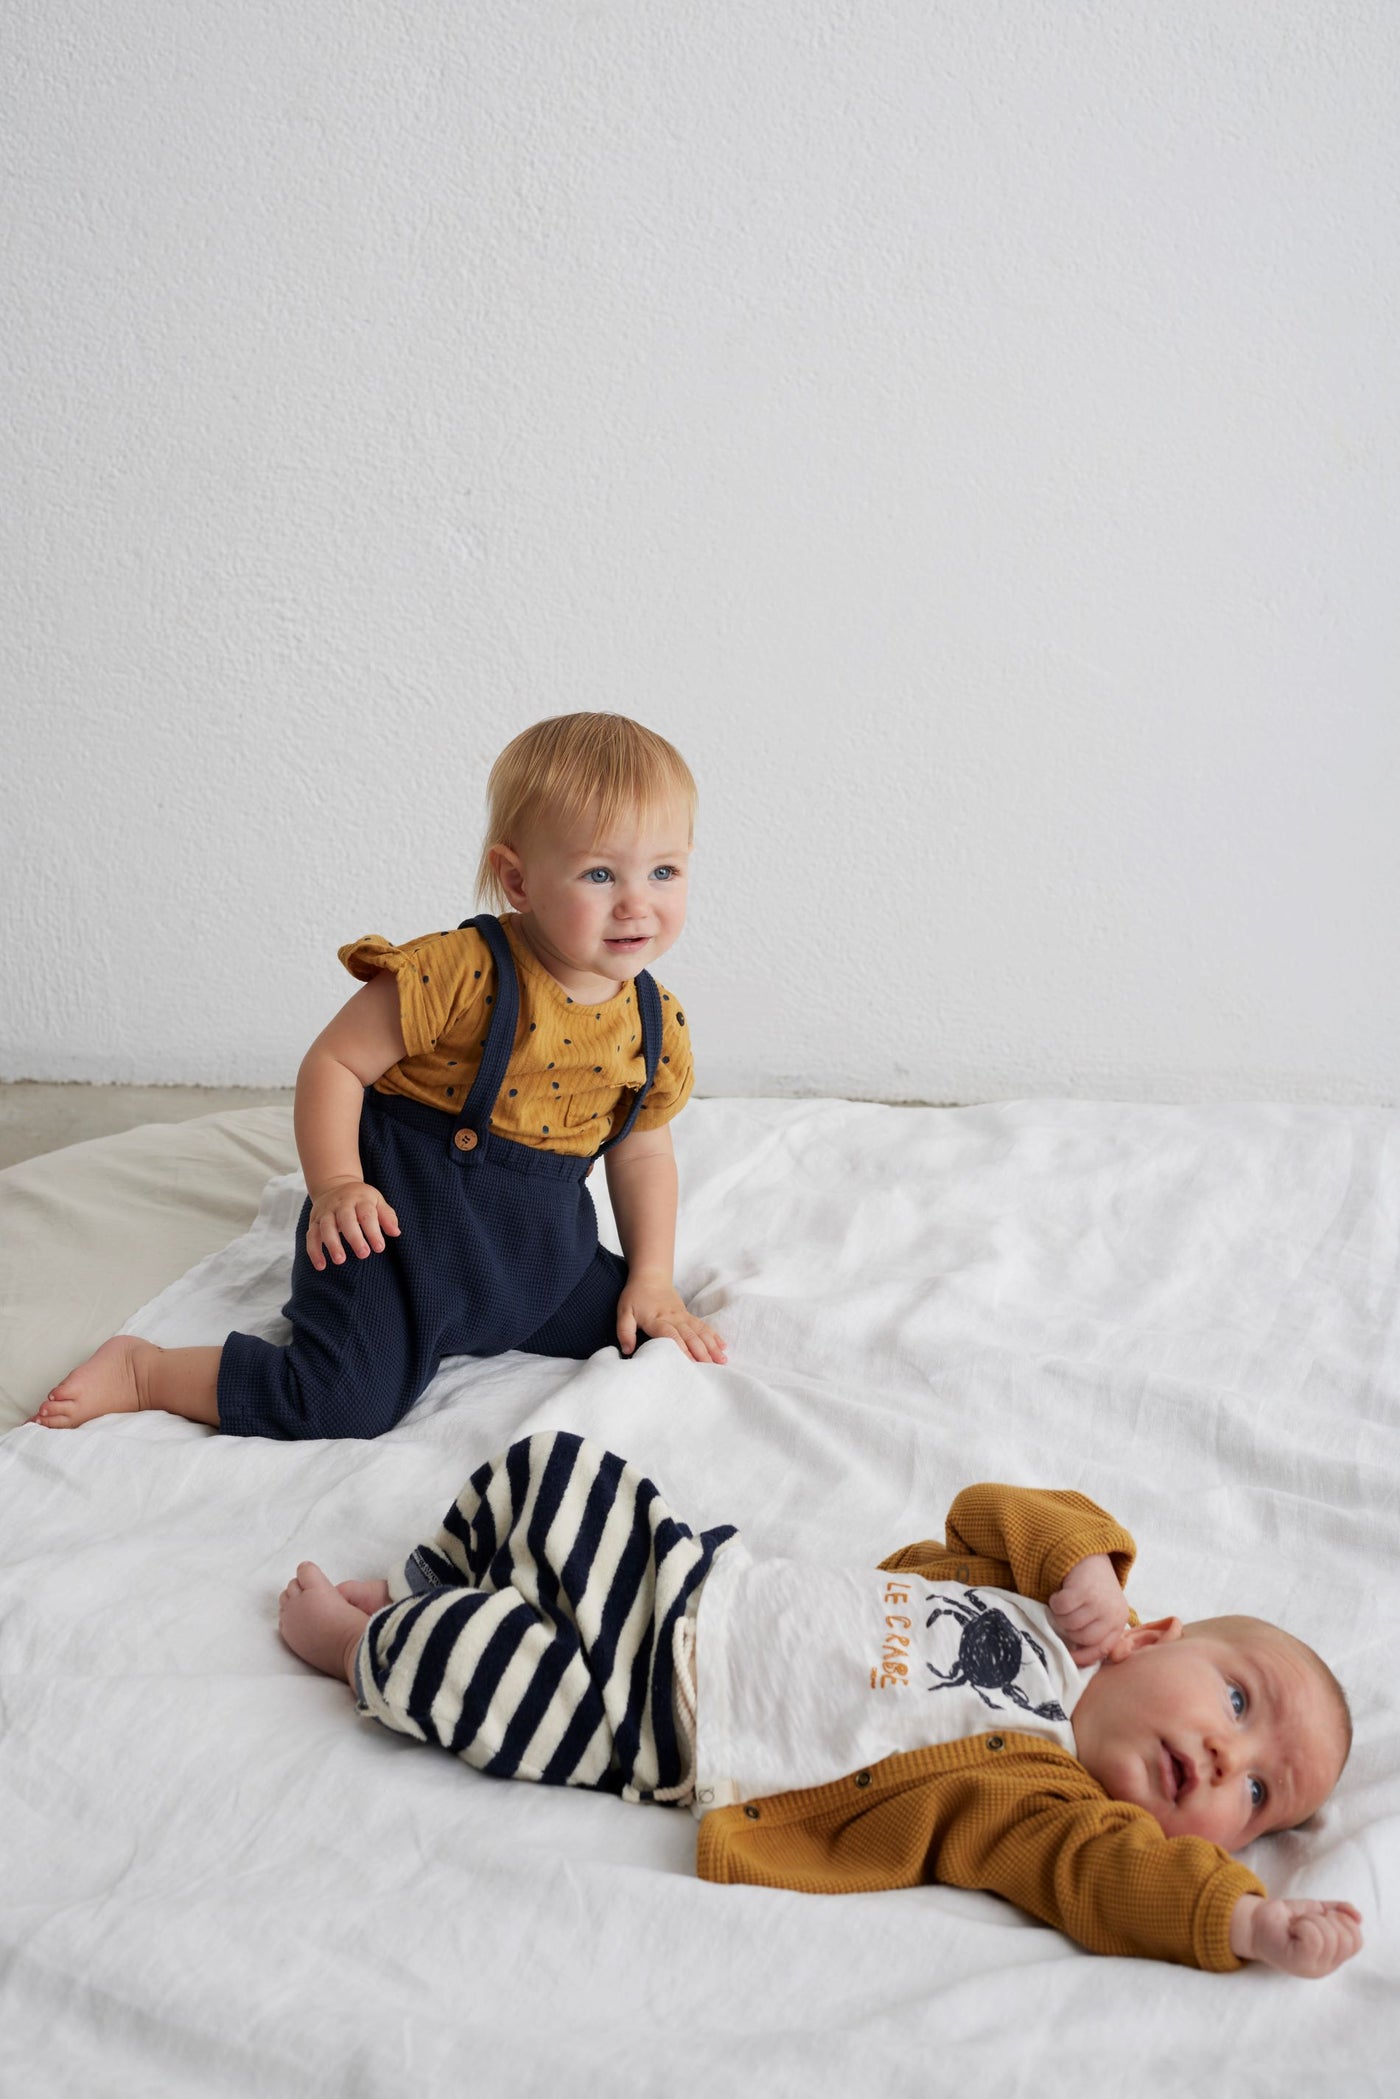 【my little cozmo】【30%OFF】Polka-dot muslin baby top Oil 半袖シャツ 12m,18m,24m  | Coucoubebe/ククベベ